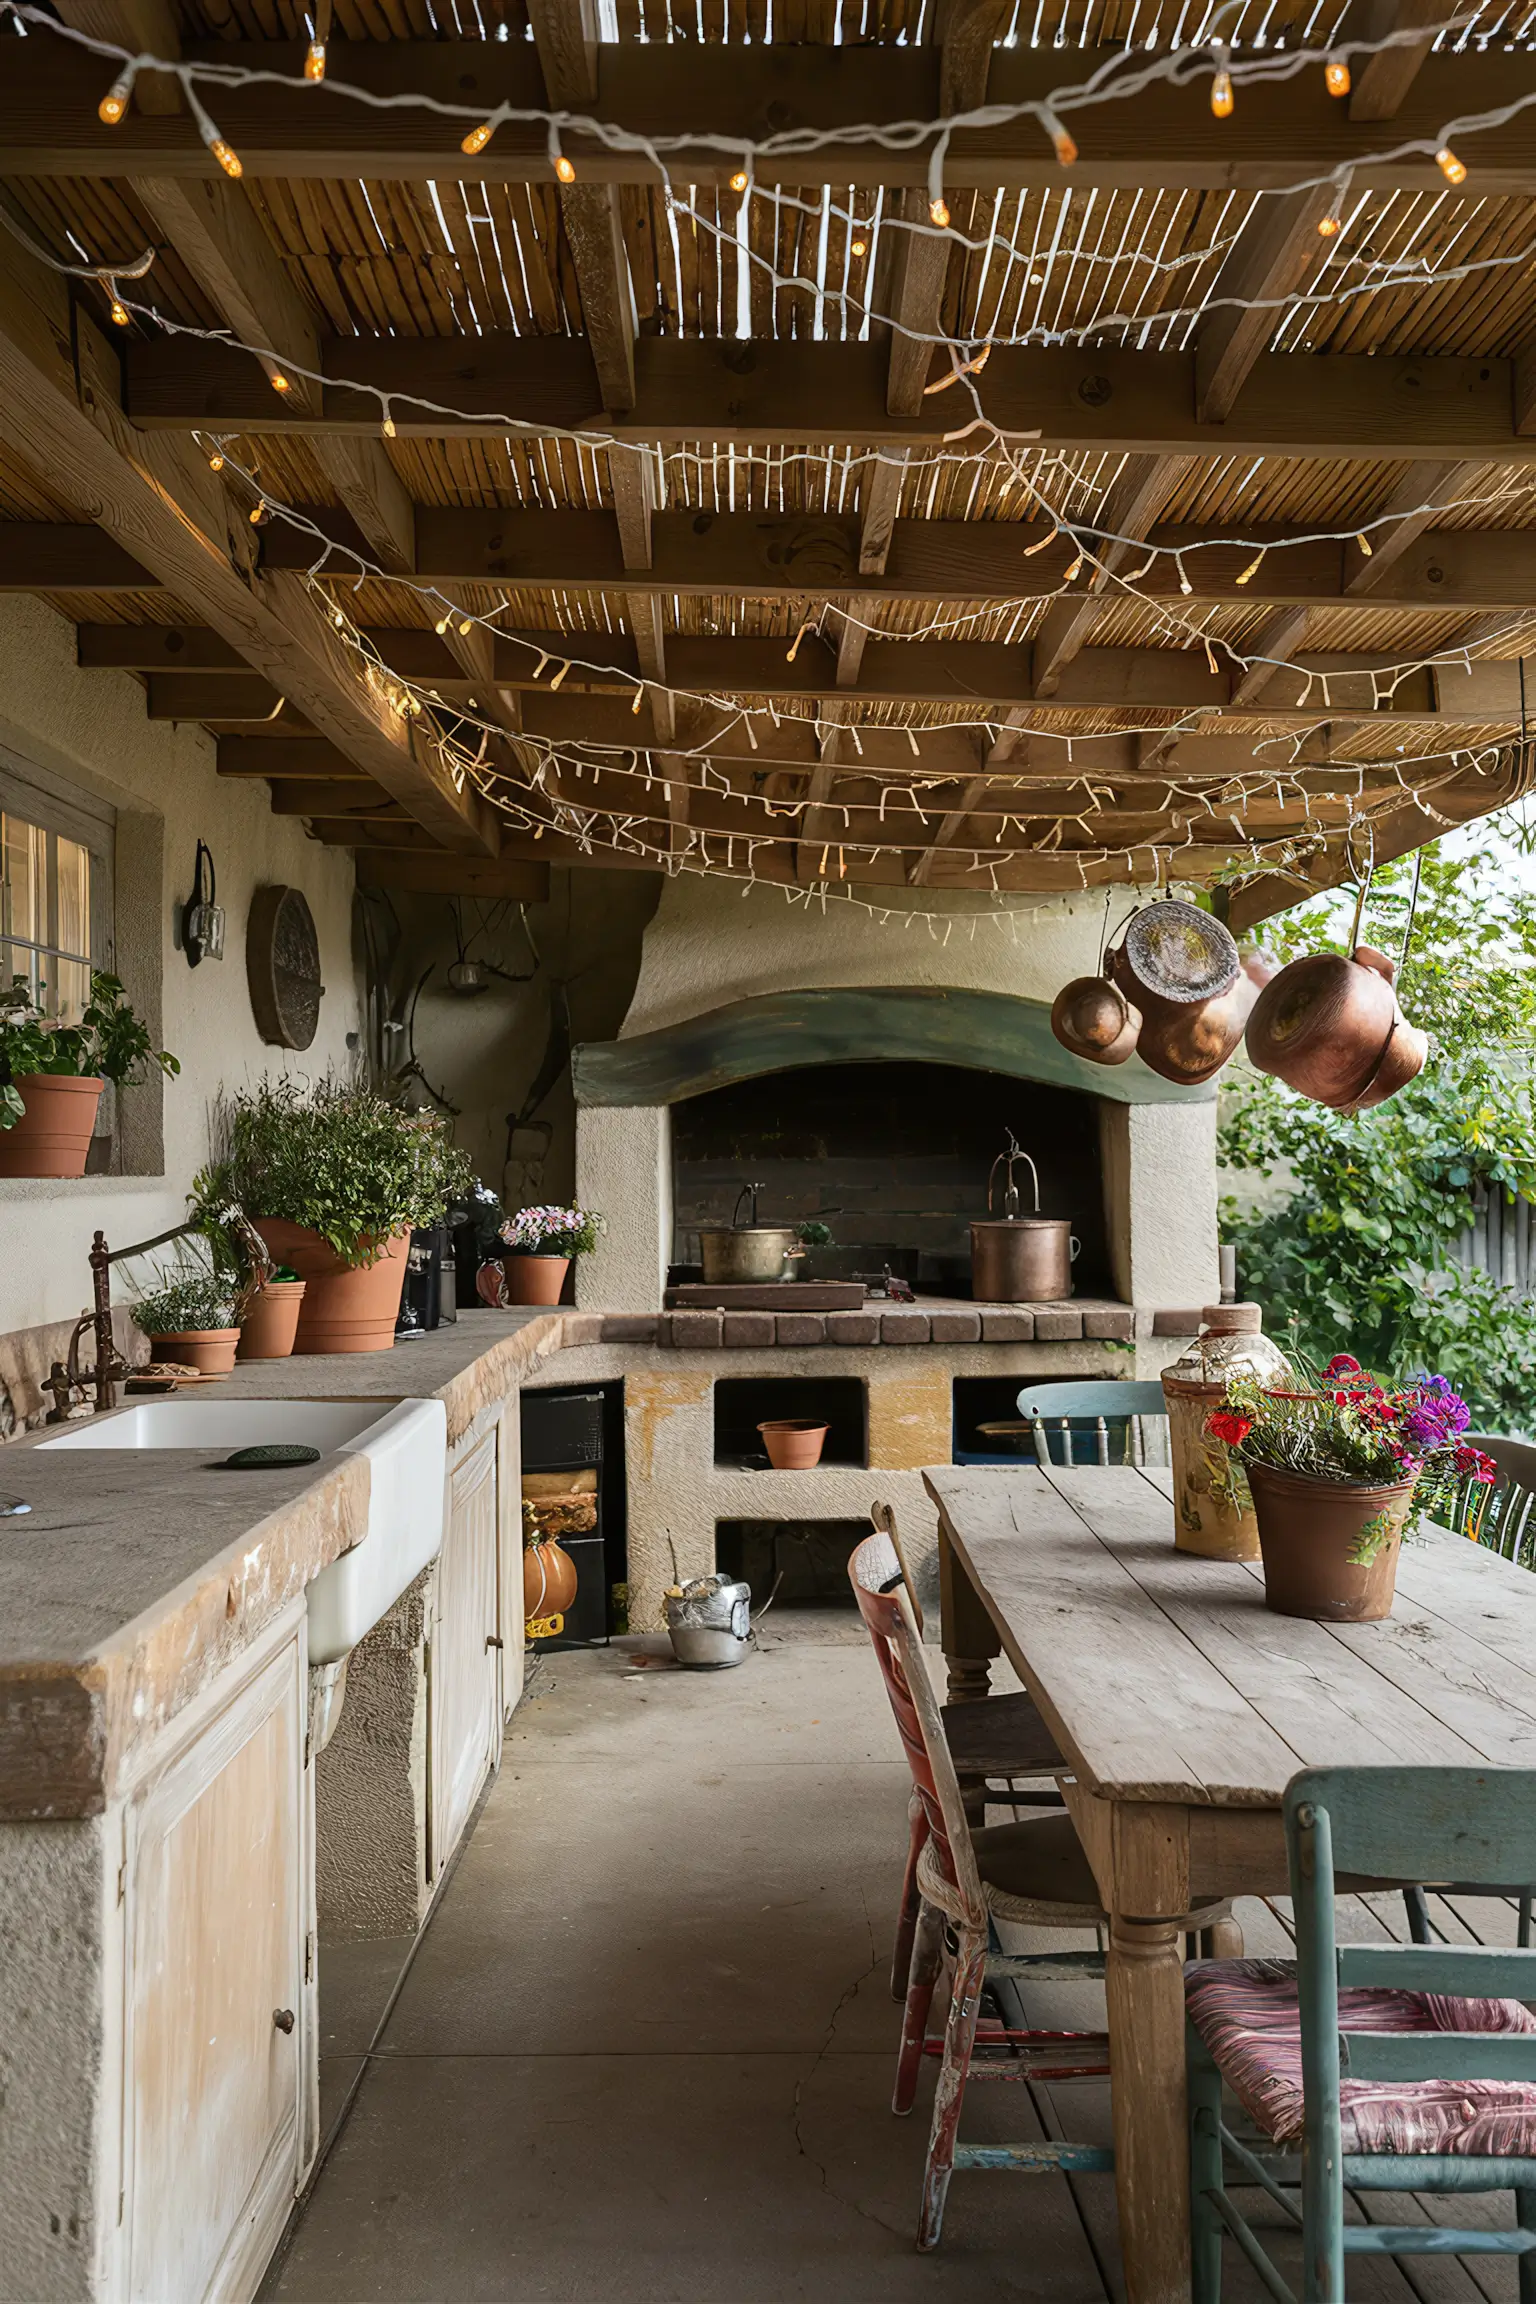 Rustic backyard kitchen with wooden pergola and stone countertops.